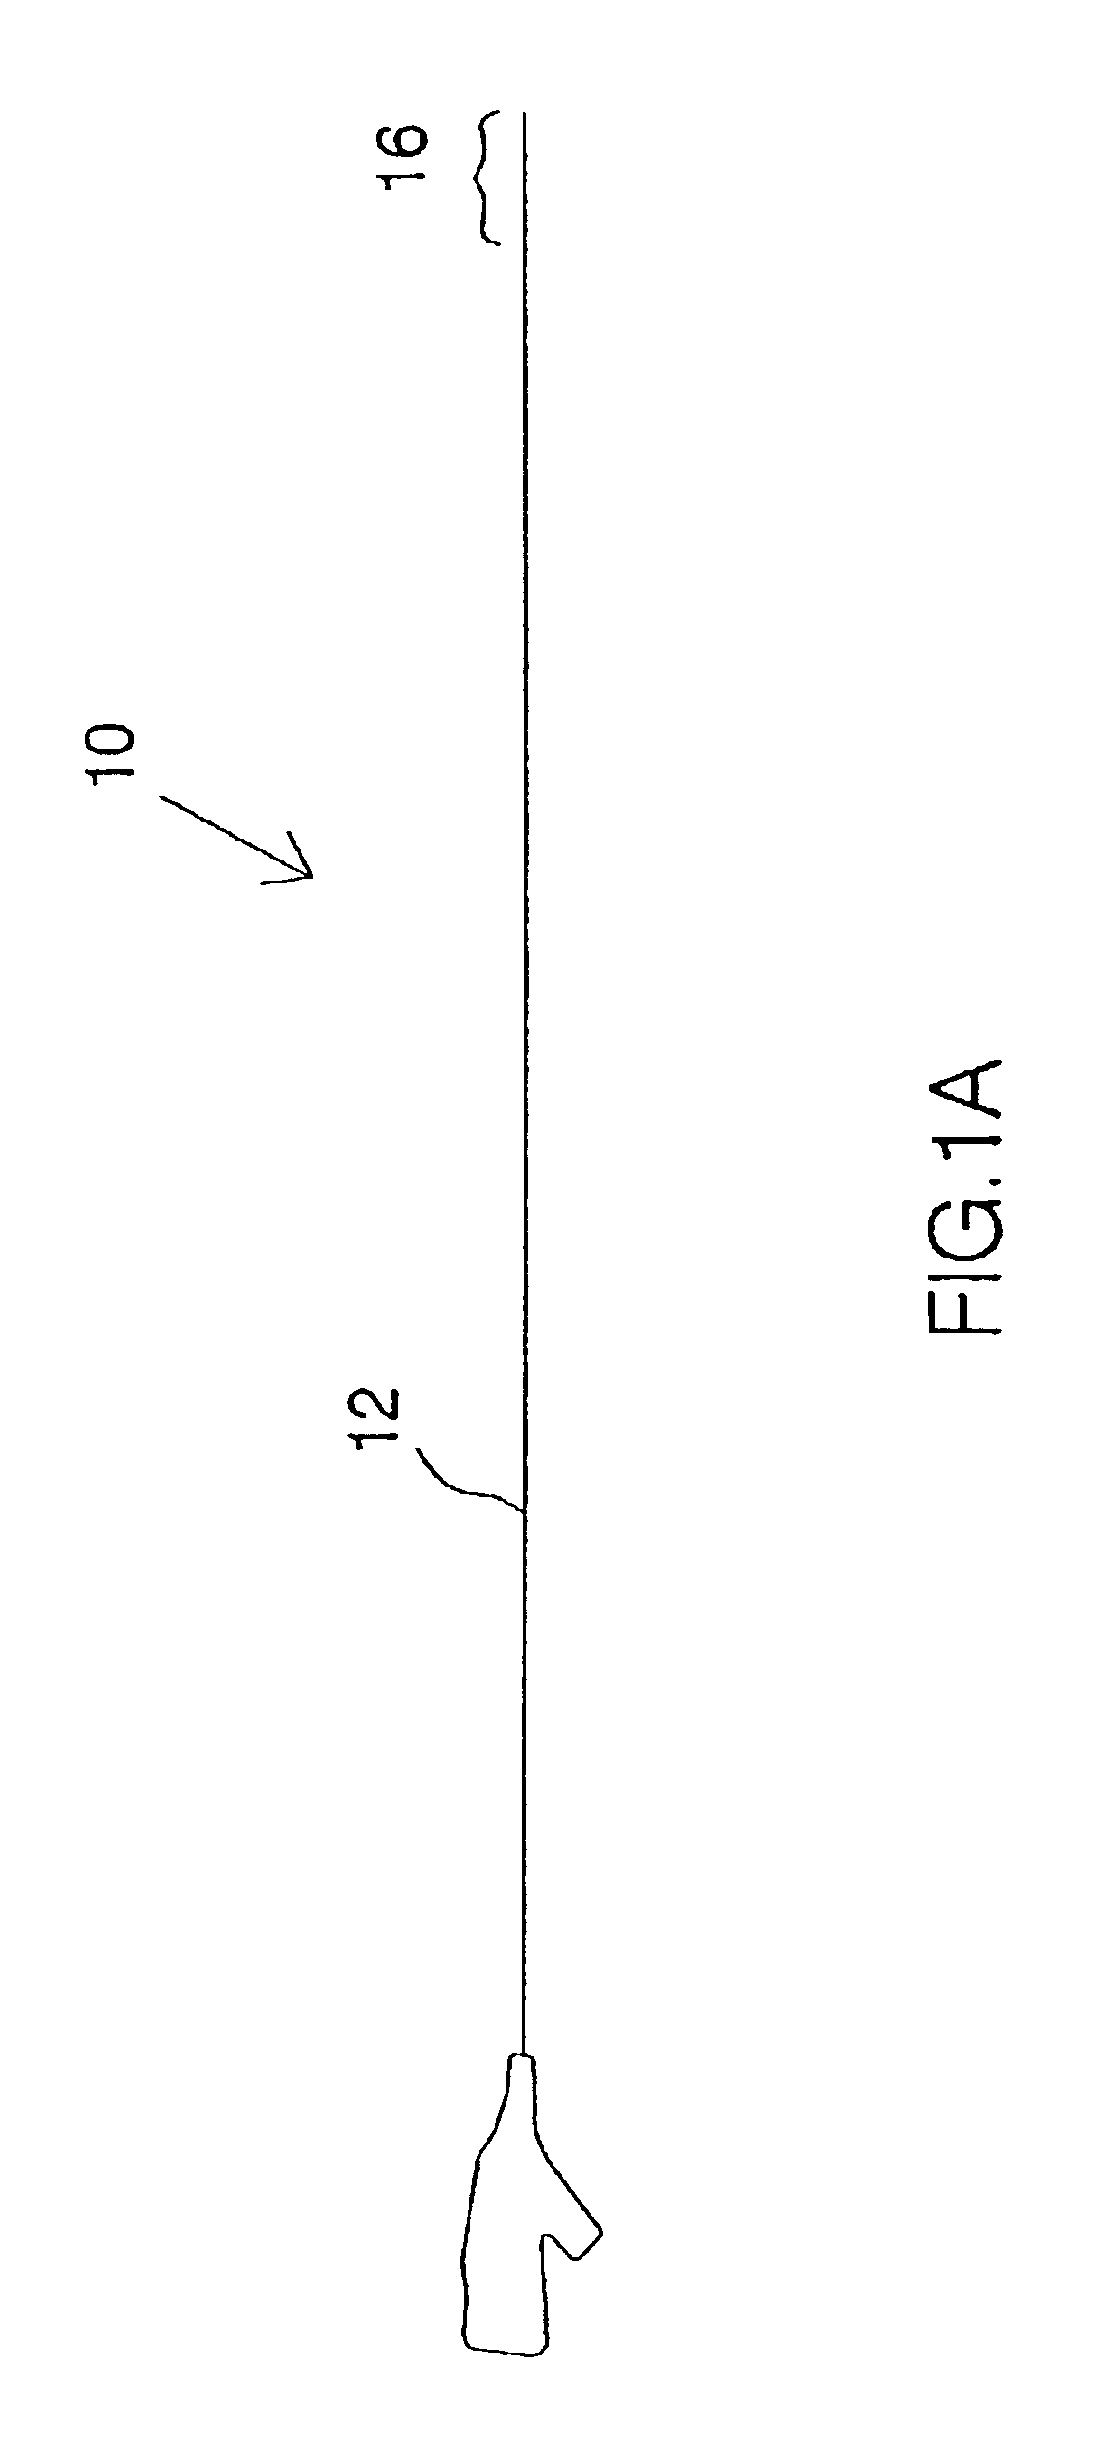 Multiple-electrode catheter assembly and method of operating such a catheter assembly